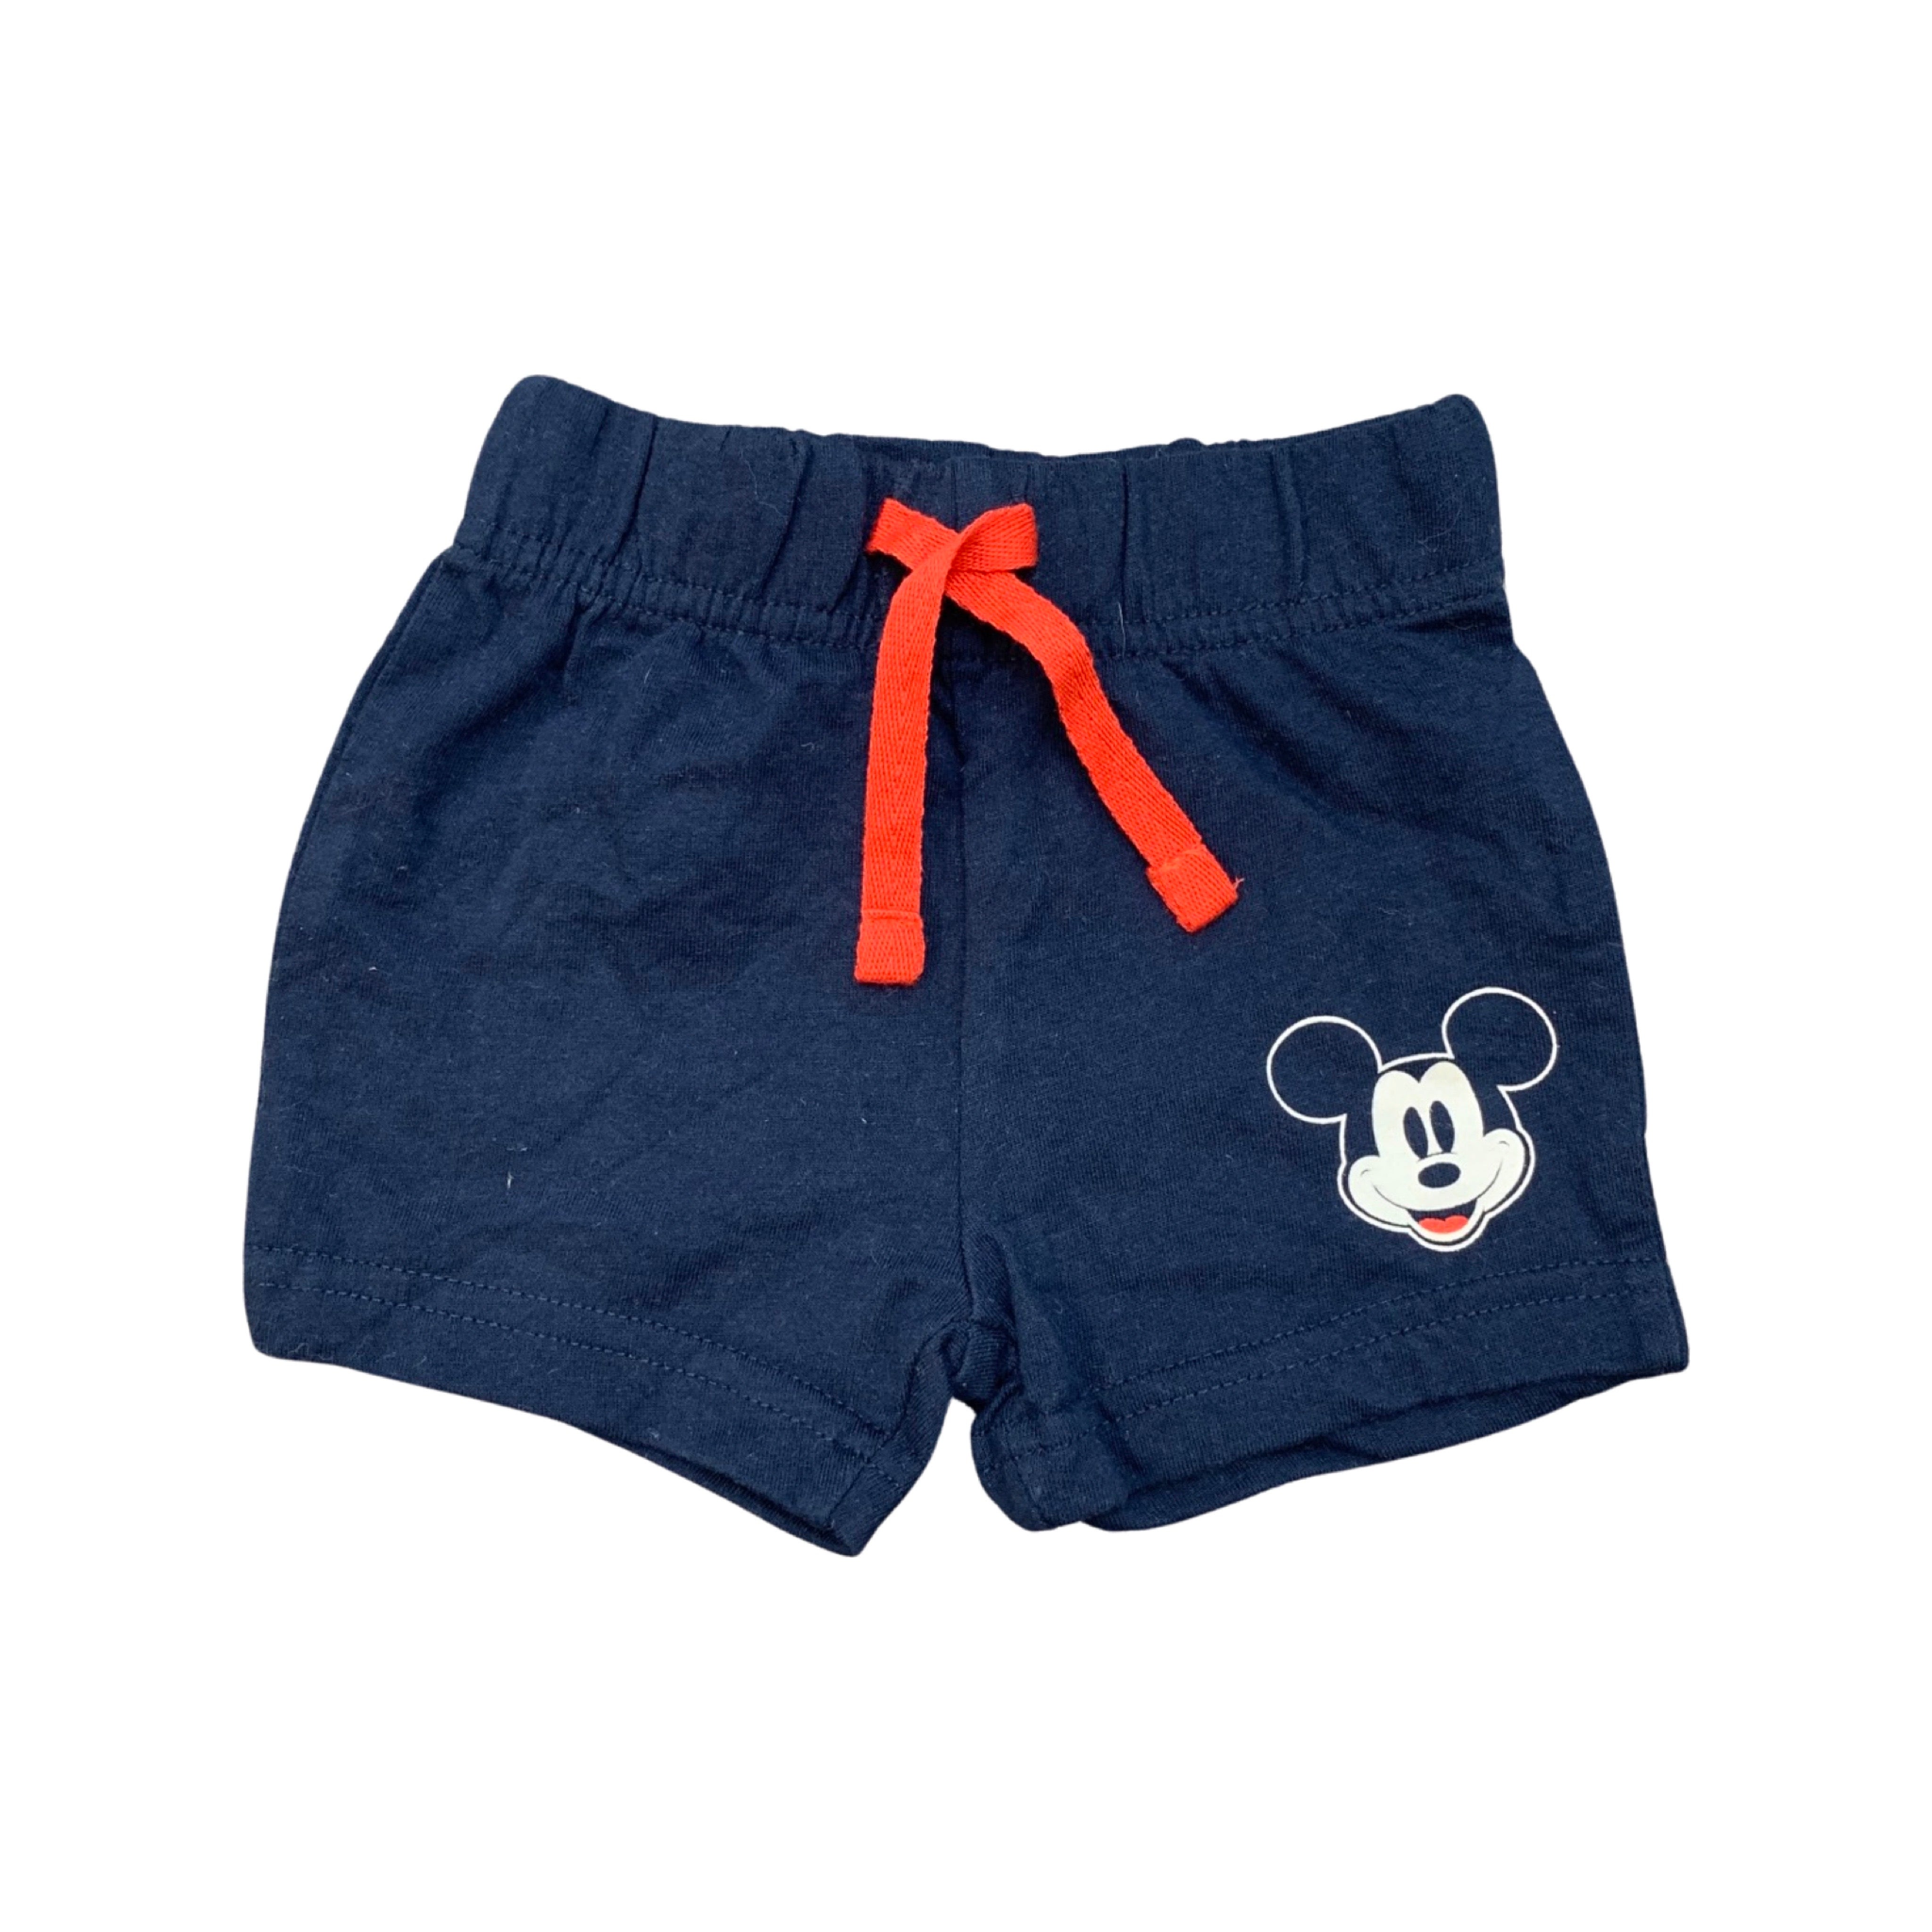 Disney @ Primark Mickey Mouse Jersey Shorts Baby Boy 0-3 Months/62cm